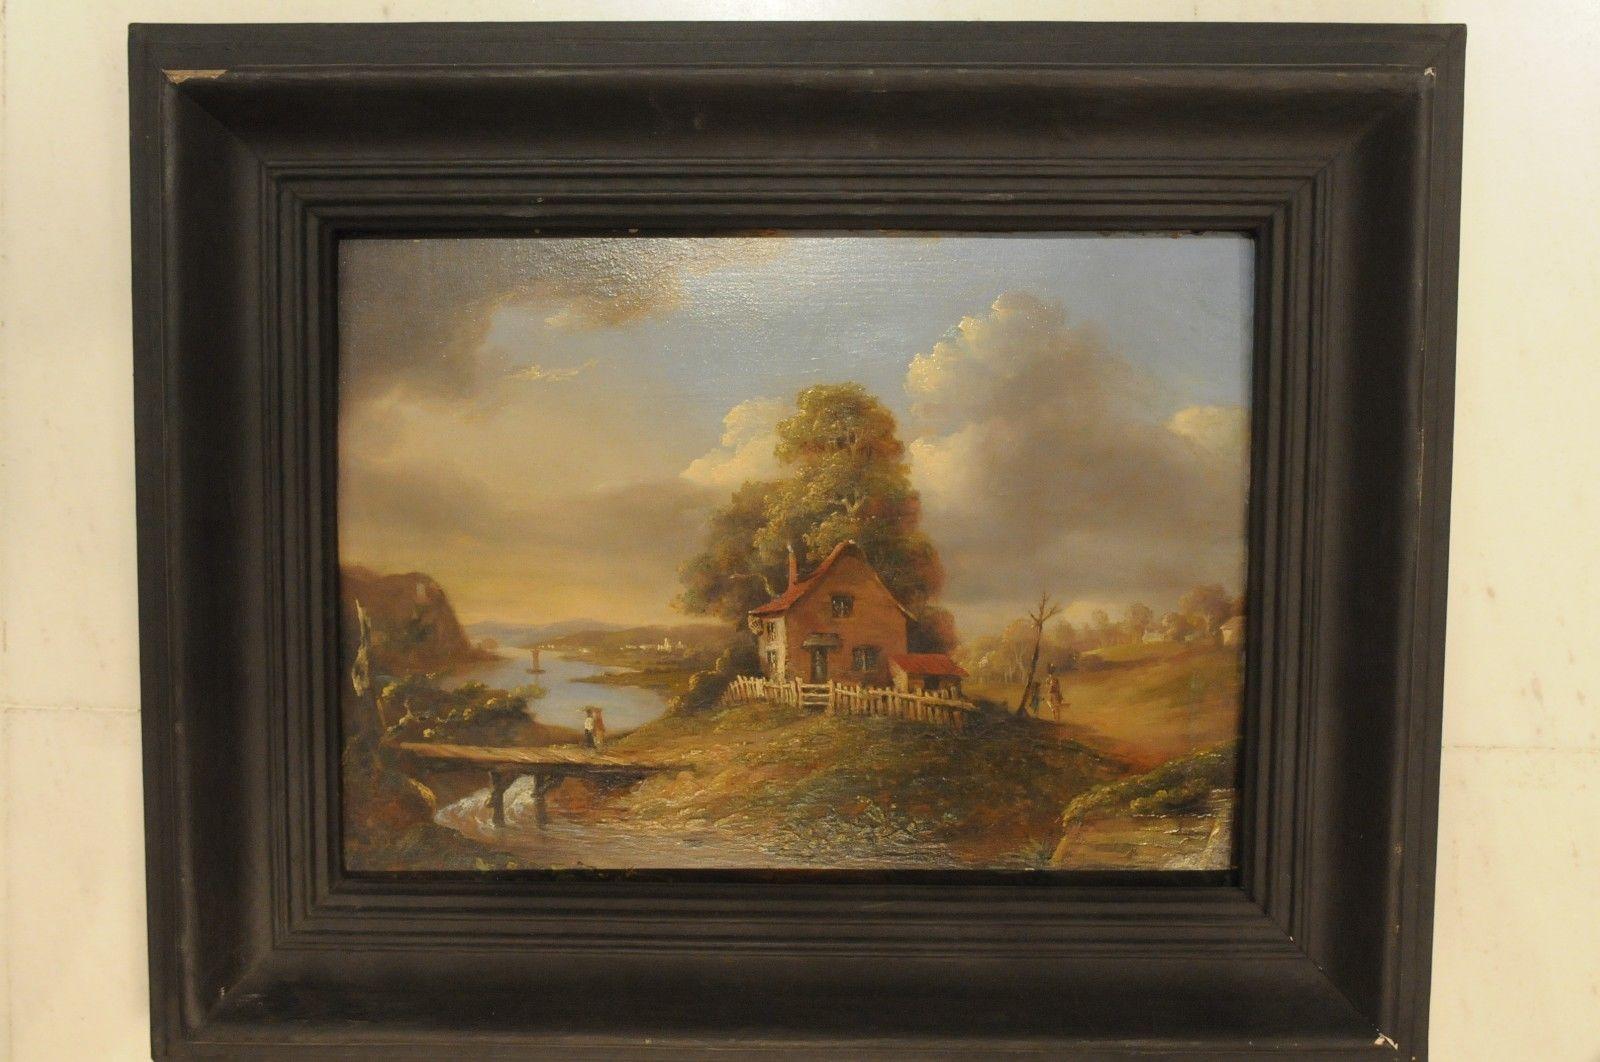 Old Master painting around 1750. River landscape with house and bridge - Painting by Unknown